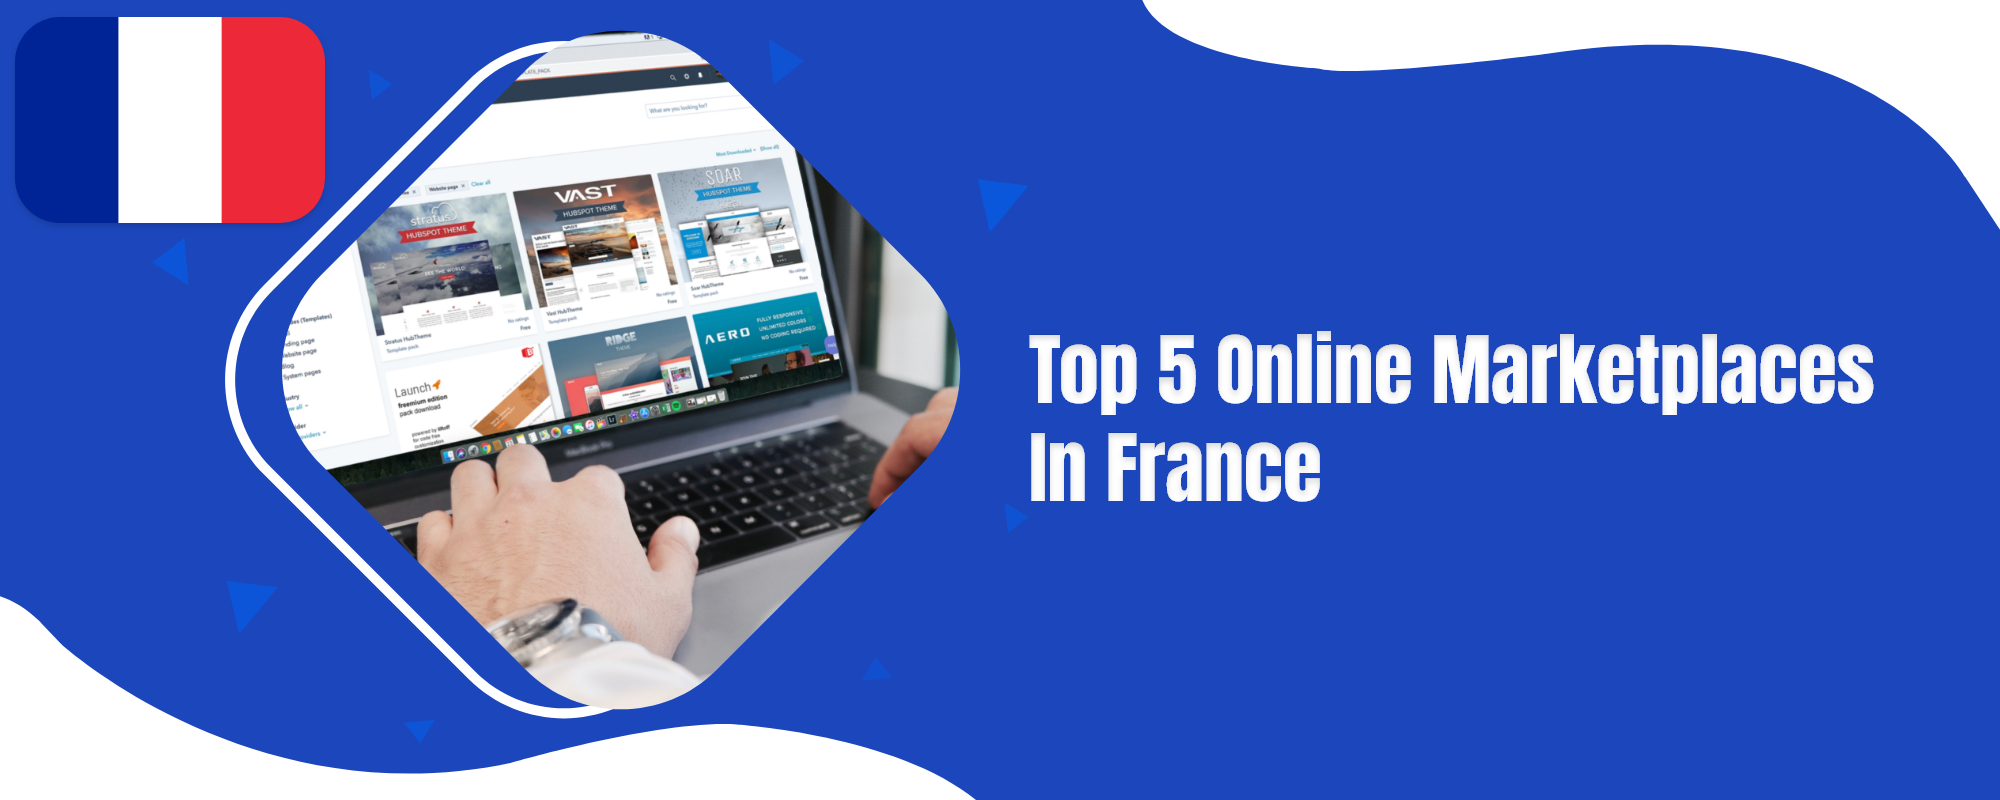 Online marketplaces in France